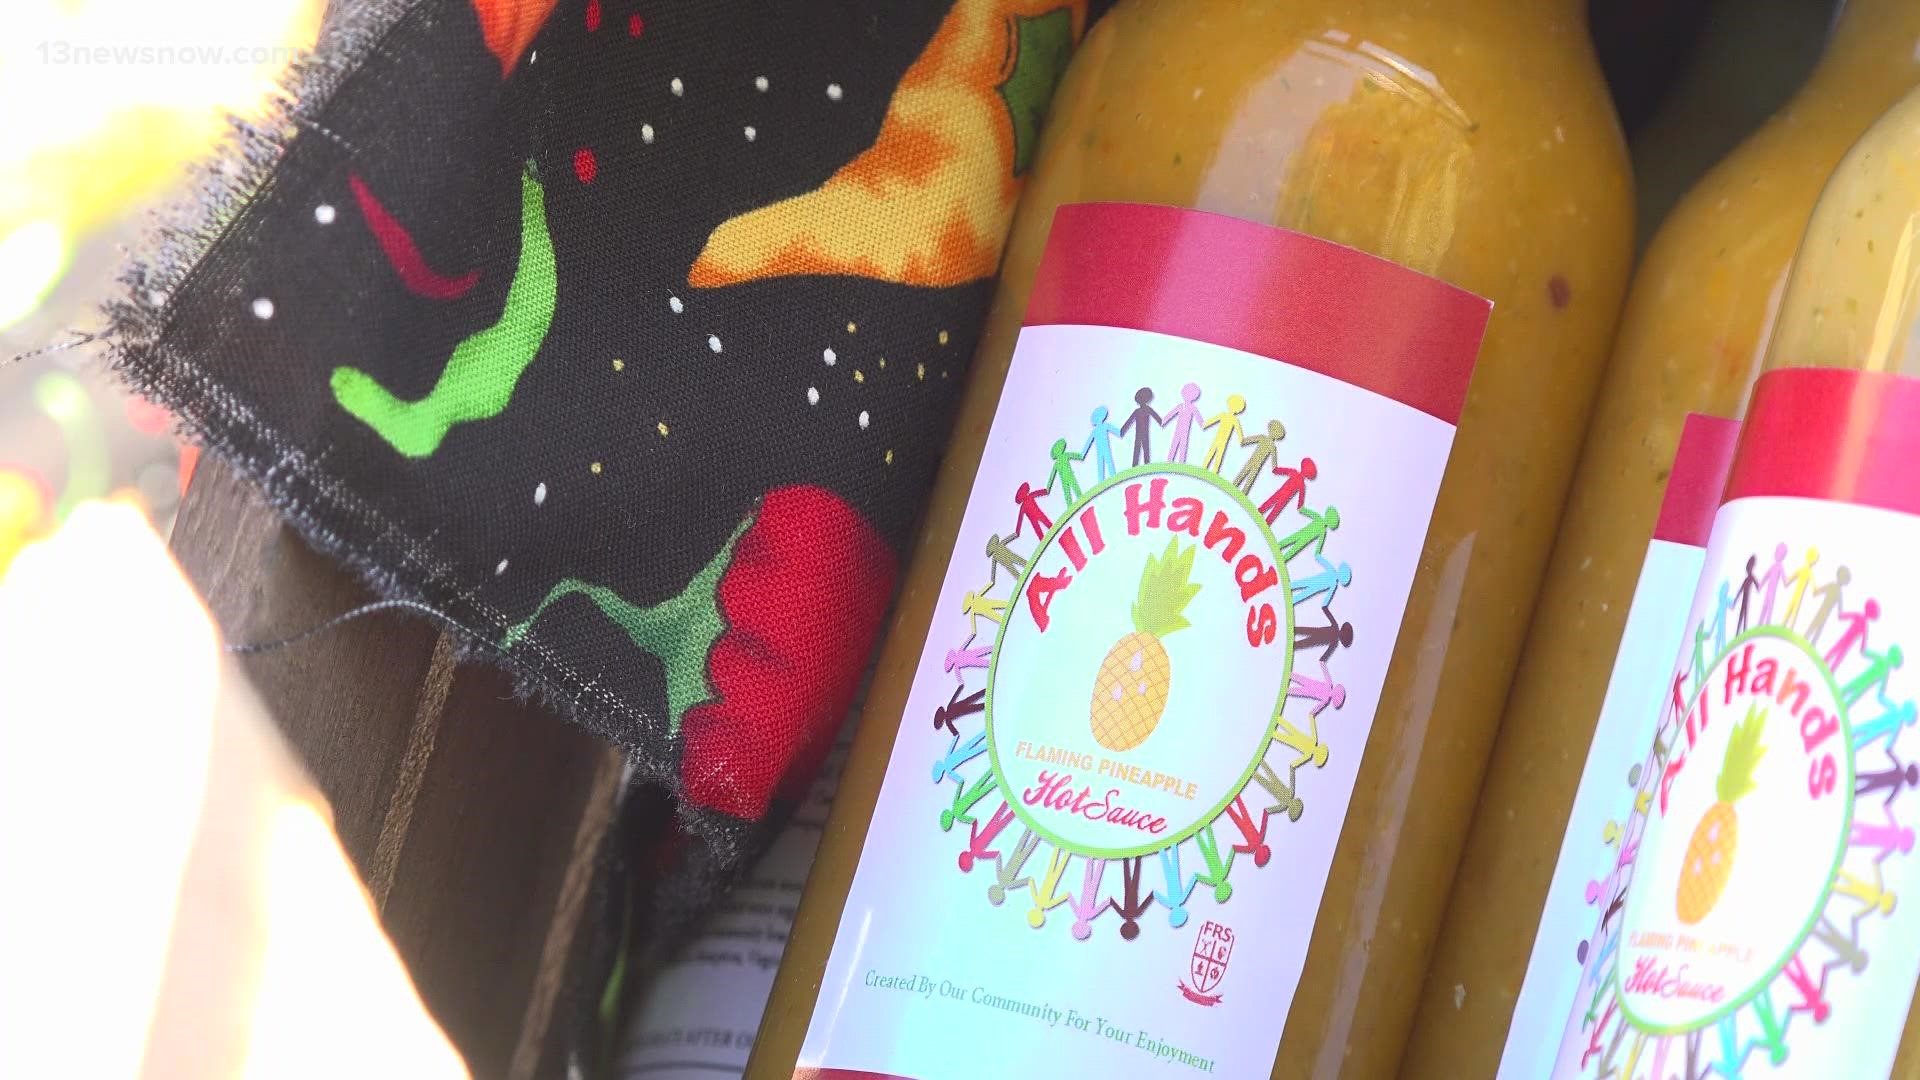 A group of kids in Hampton started their 'All Hands' hot sauce brand to support local non-profit groups.